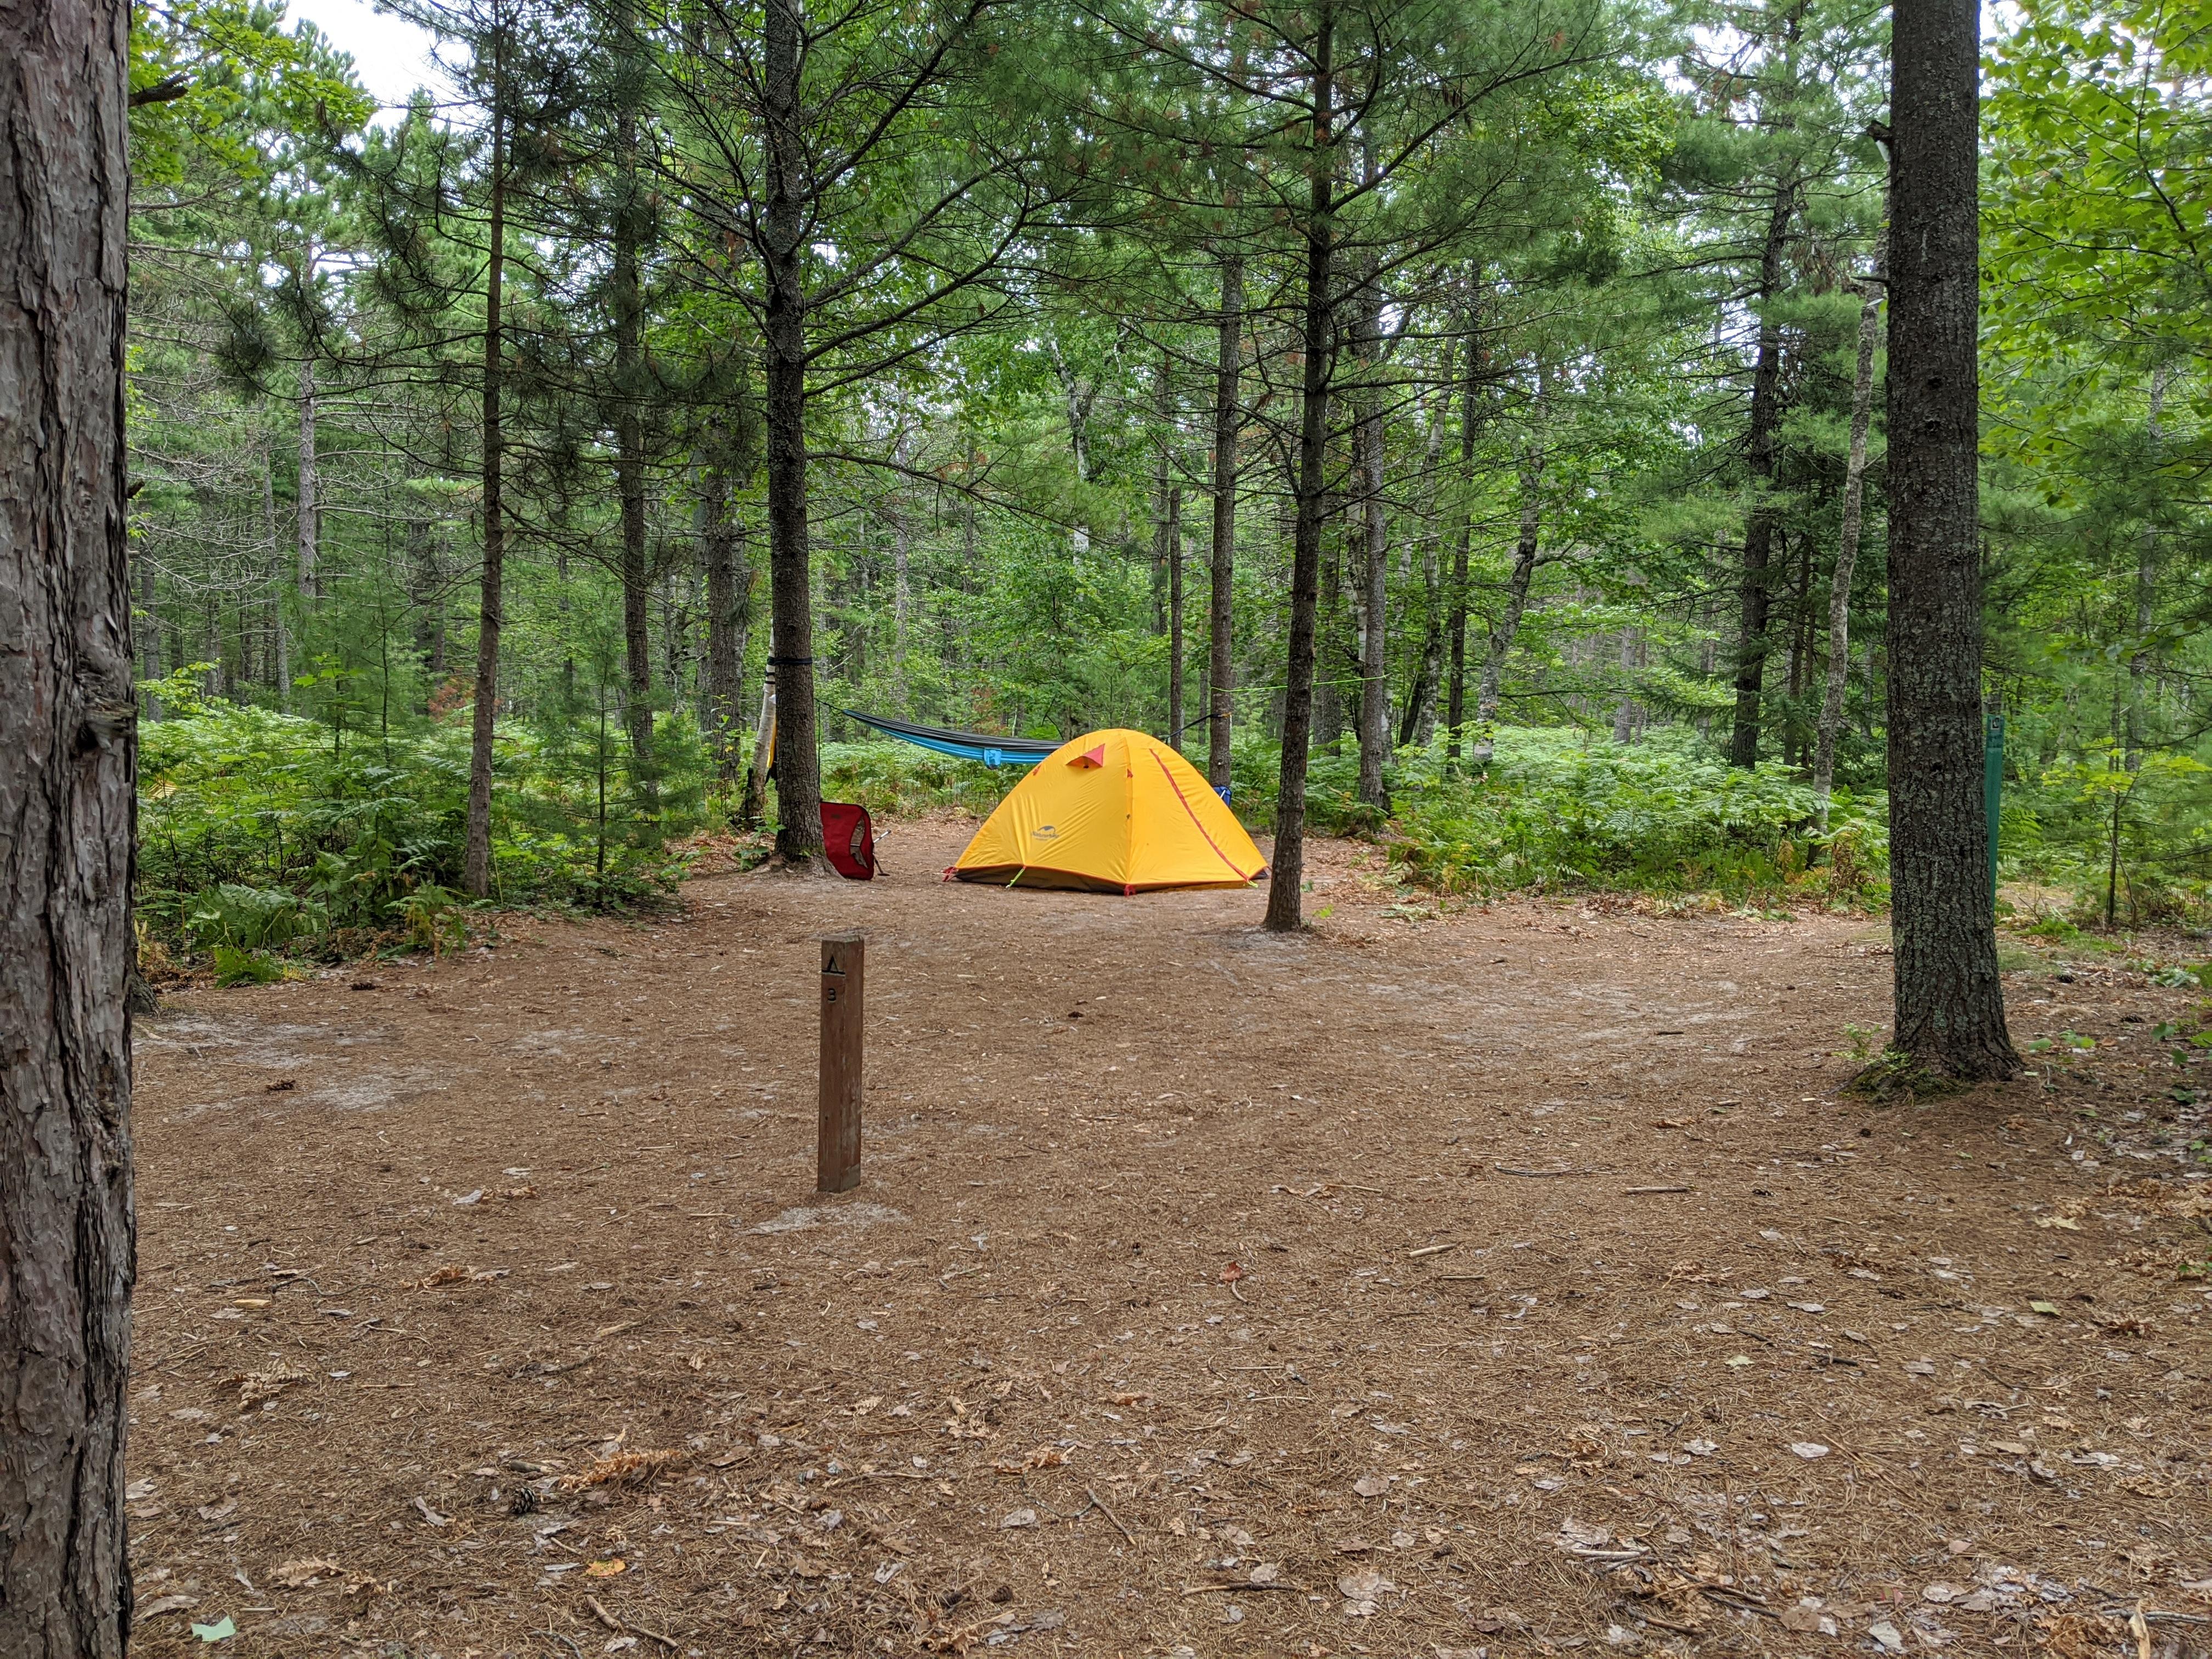 Yellow tent and hammock are set up in a cleared area in the middle of a forest.